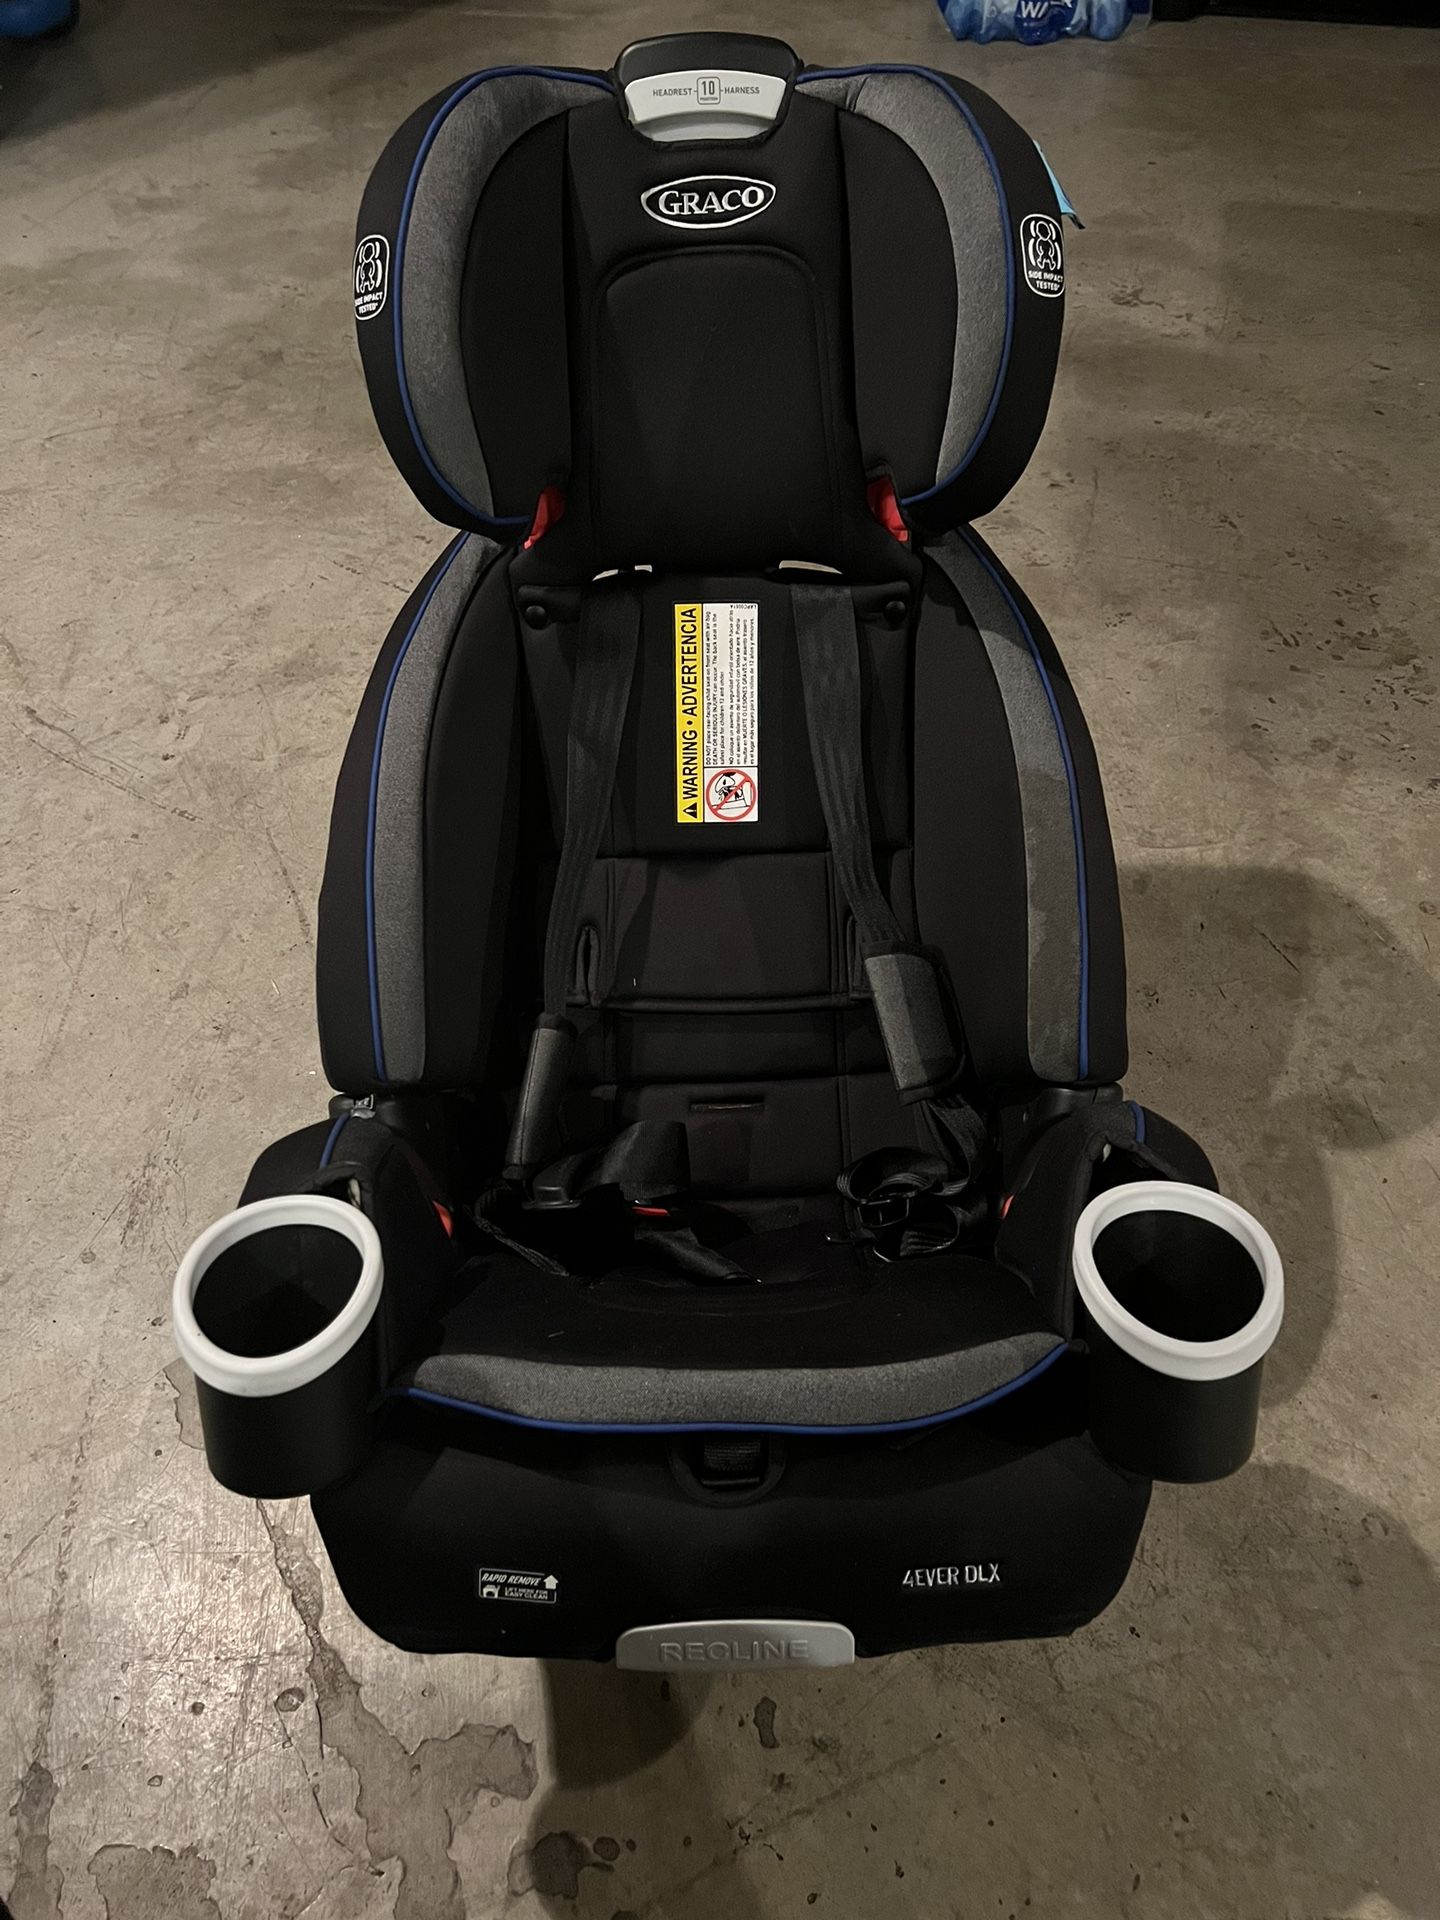 MODEL (contact info removed) GRACO CHILDREN’S CAR SEAT